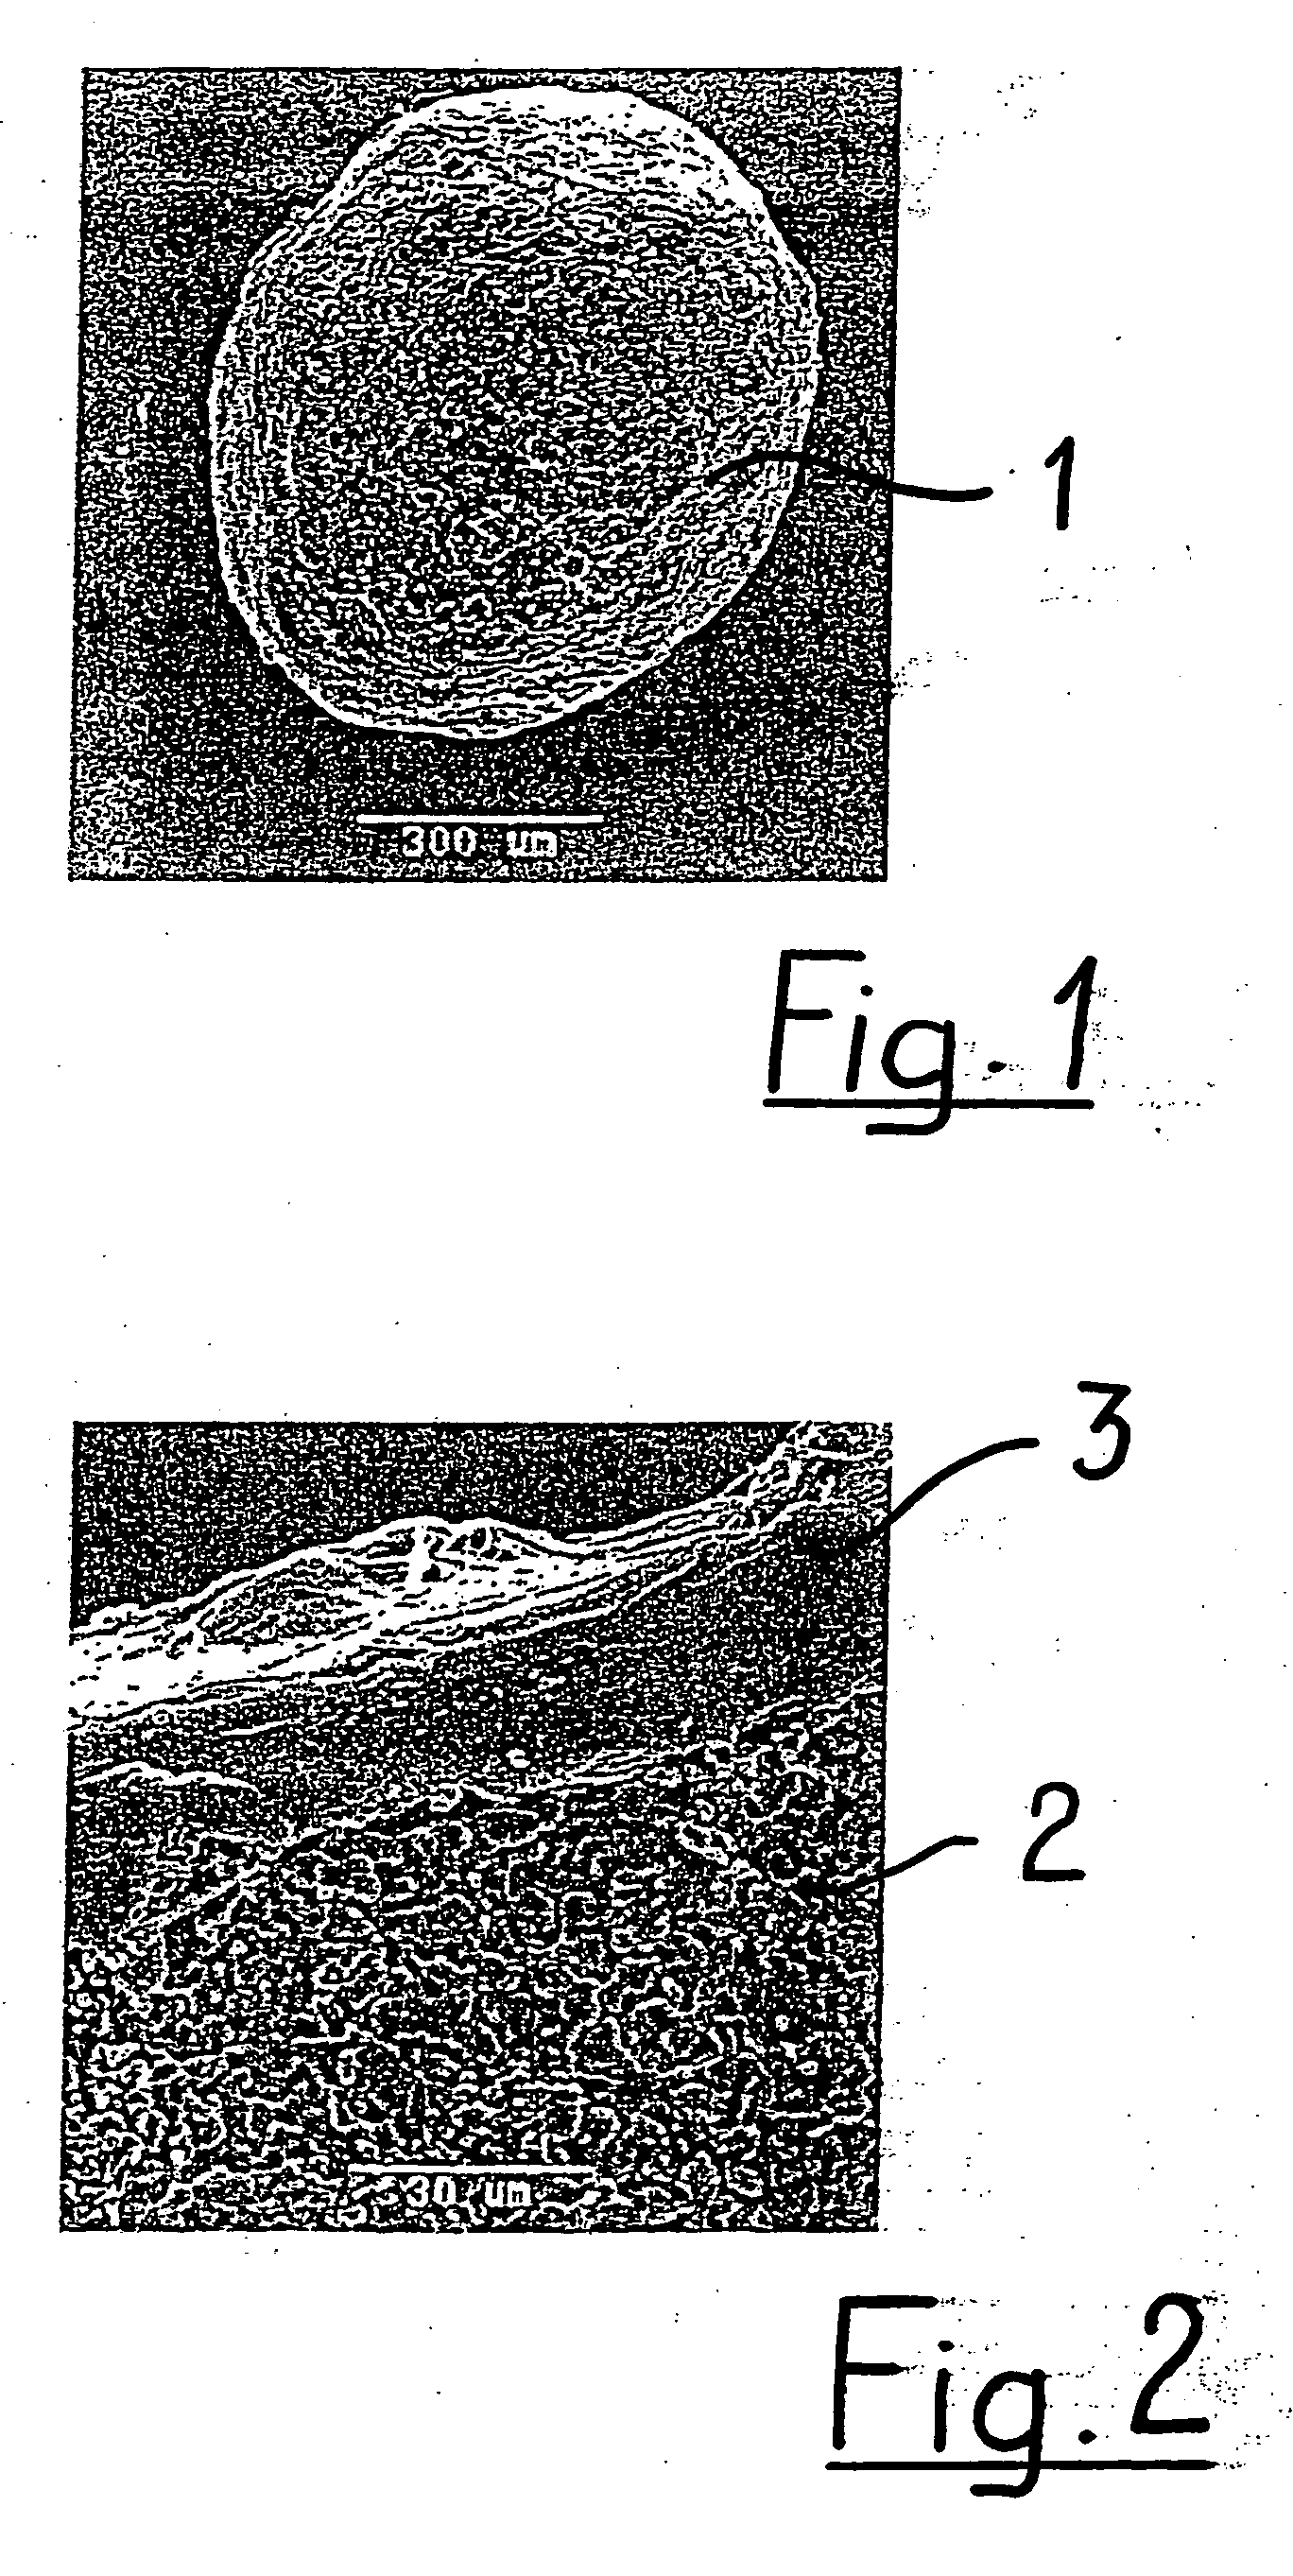 Porous biocompatible implant material and method for its fabrication